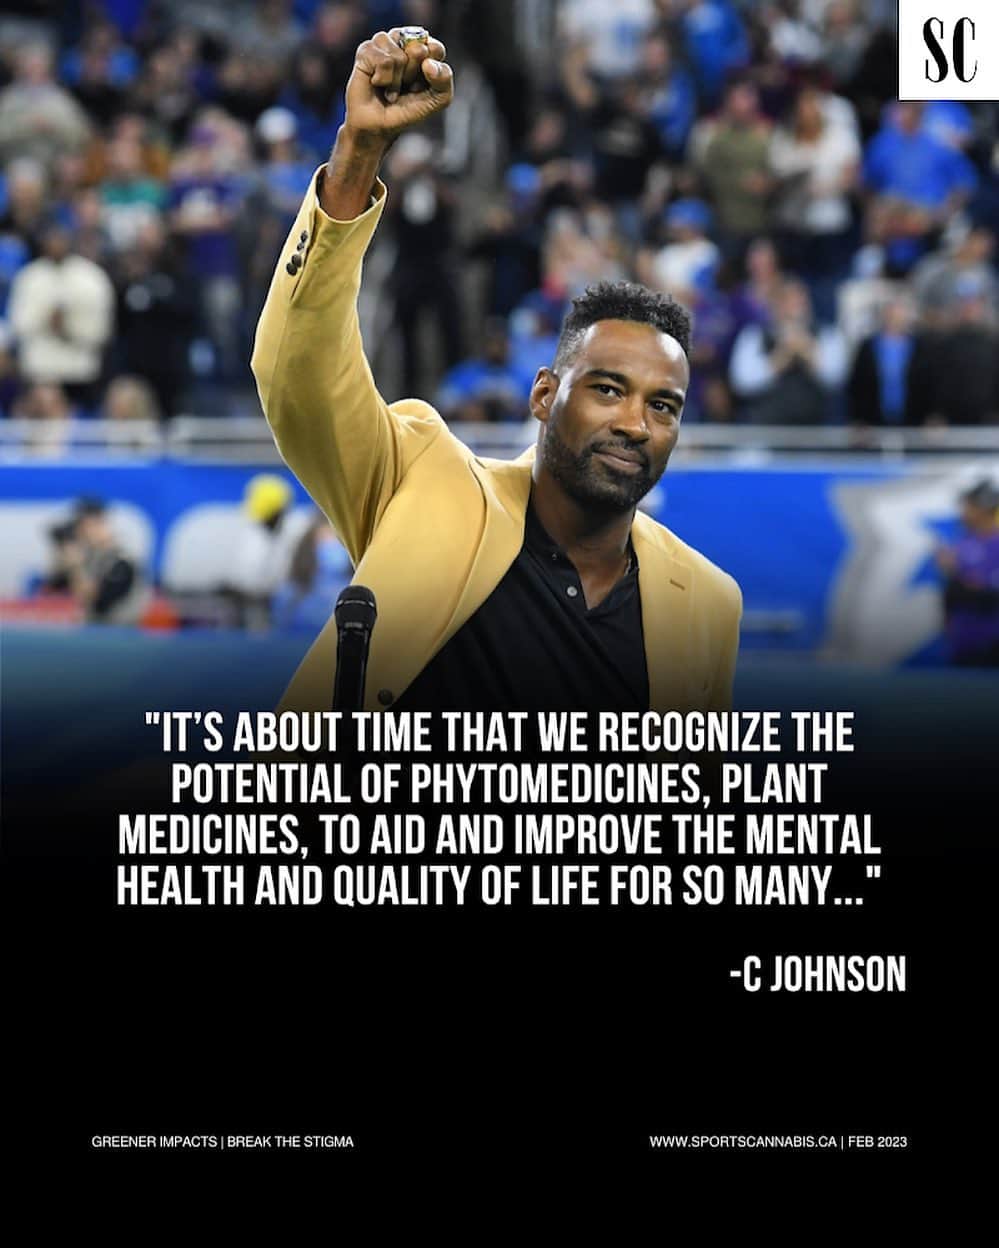 カルビン・ジョンソンのインスタグラム：「Highlighting Retired and Active NFL Athletes Pushing for Greener Impacts On and Off the Field  Today, elite football athletes are playing a pivotal role in the progression of Cannabis and athletics.  Since retiring, NFL Superstar, Hall of Famer and Co-Founder of @primitiv_group ; Calvin “ @megatron “ Johnson Jr. has been using his platform to advocate for greener impacts off the field.  Johnson was selected 2nd overall in the 2007 NFL Draft by the Detroit Lions, playing 9 seasons.  Nicknamed Megatron, he’s regarded as one of the greatest wide receivers of all time with career highlights that include; being a three-time All-Pro, Six-time Pro Bowl Team, the leading receiver two years in a row in 2011’12, holding the title for most receptions in 2012, co-lead the NFL for receiving touchdowns ’08 and in 2021 was voted into the Pro Football Hall of Fame.   Pushing for an even playing field, in 2019, Johnson was named to the board of directors of the MiCIA (Michigan Cannabis Industry Association), the leading voice for Michigan’s legal cannabis industry which advocates for sensible laws, regulations and best practices.  Leading the Sports Cannabis movement for athlete entrepreneurs, Johnson partnered with former Detroit Lions teammate Rob “ @robsims67 “ Sims to create Primitiv Group, launching several cannabis facilities across the state over the past four years.   Focused on cannabis education, Johnson and Sims donated resources to the International Phytomedicine and Medical Cannabis Institute at Harvard.  Looking to change the narrative, Johnson talked about the importance of recognizing plant-based modalities in his Hall of Fame induction speech;   “It’s about time that we recognize the potential of phytomedicines, plant medicines, to aid and improve the mental health and quality of life for so many.” -C Johnson Jr.  With an opportunity to offer new applications for athletes and cannabis consumers, Johnson and Sims recently launched @primitivperformance , a phytocannabinoid-infused CBD line of products incorporating nano-technology.  Learn About his Movement; WWW.SPORTSCANNABIS.LIFE」